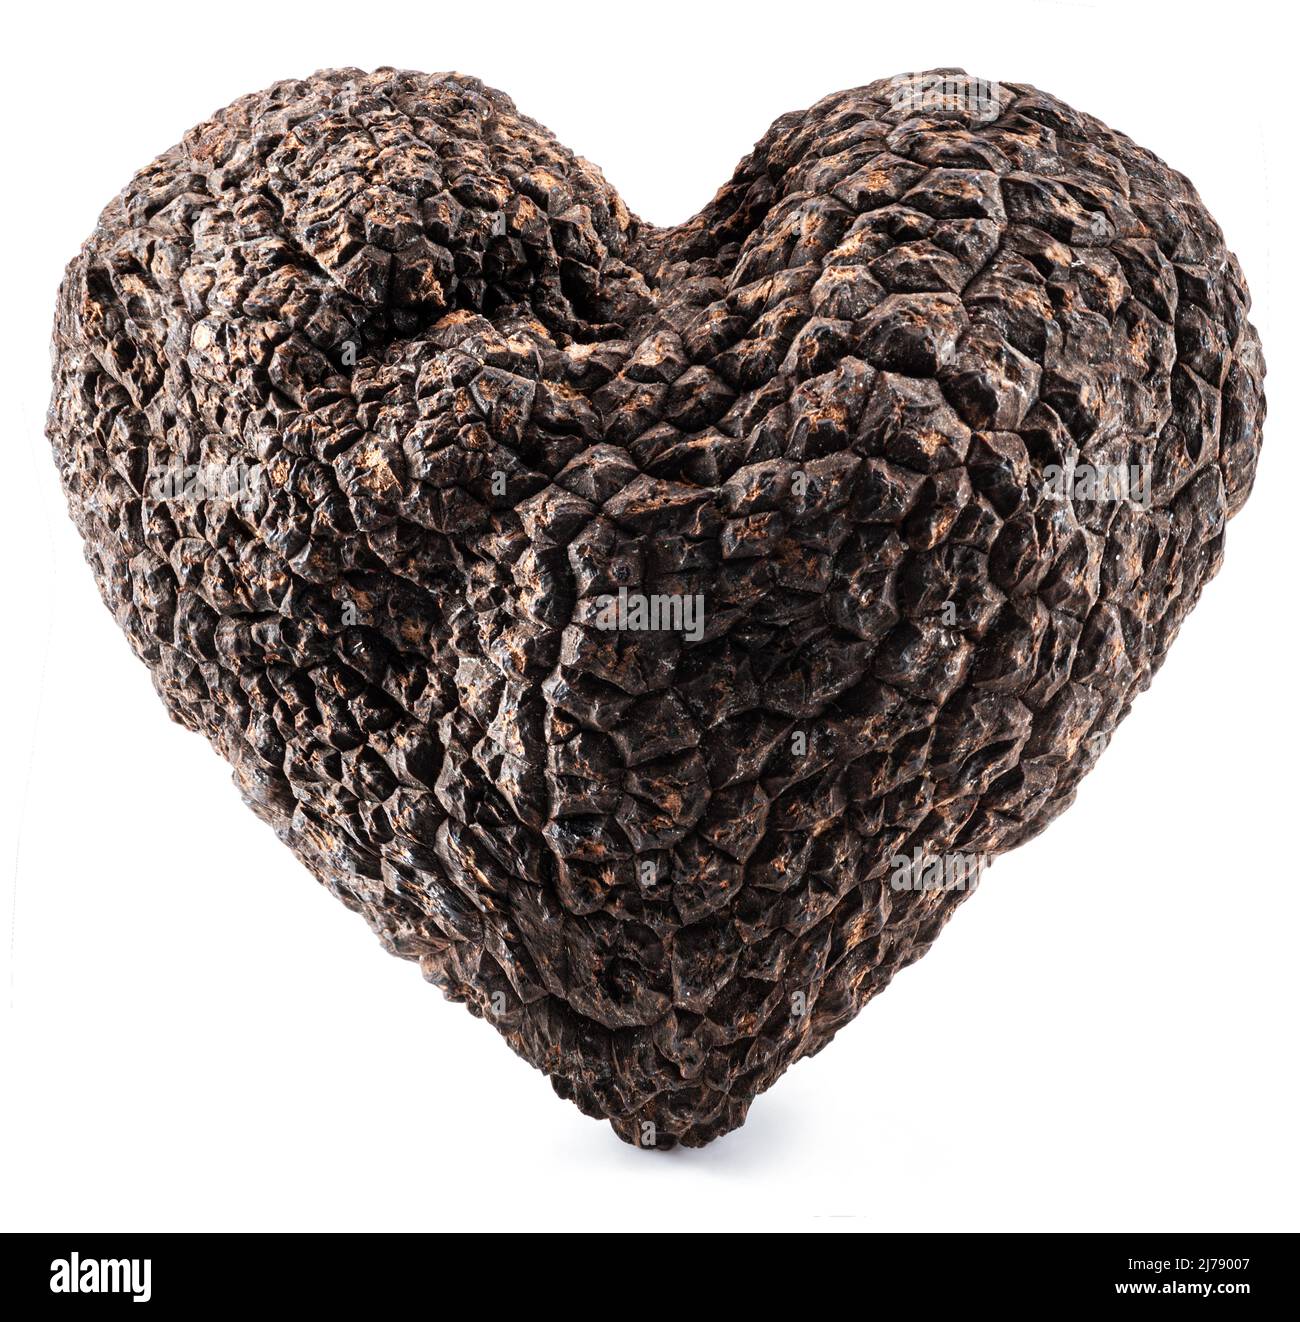 Black edible winter truffle in a shape of heart on white background. The most famous of the truffles. Stock Photo